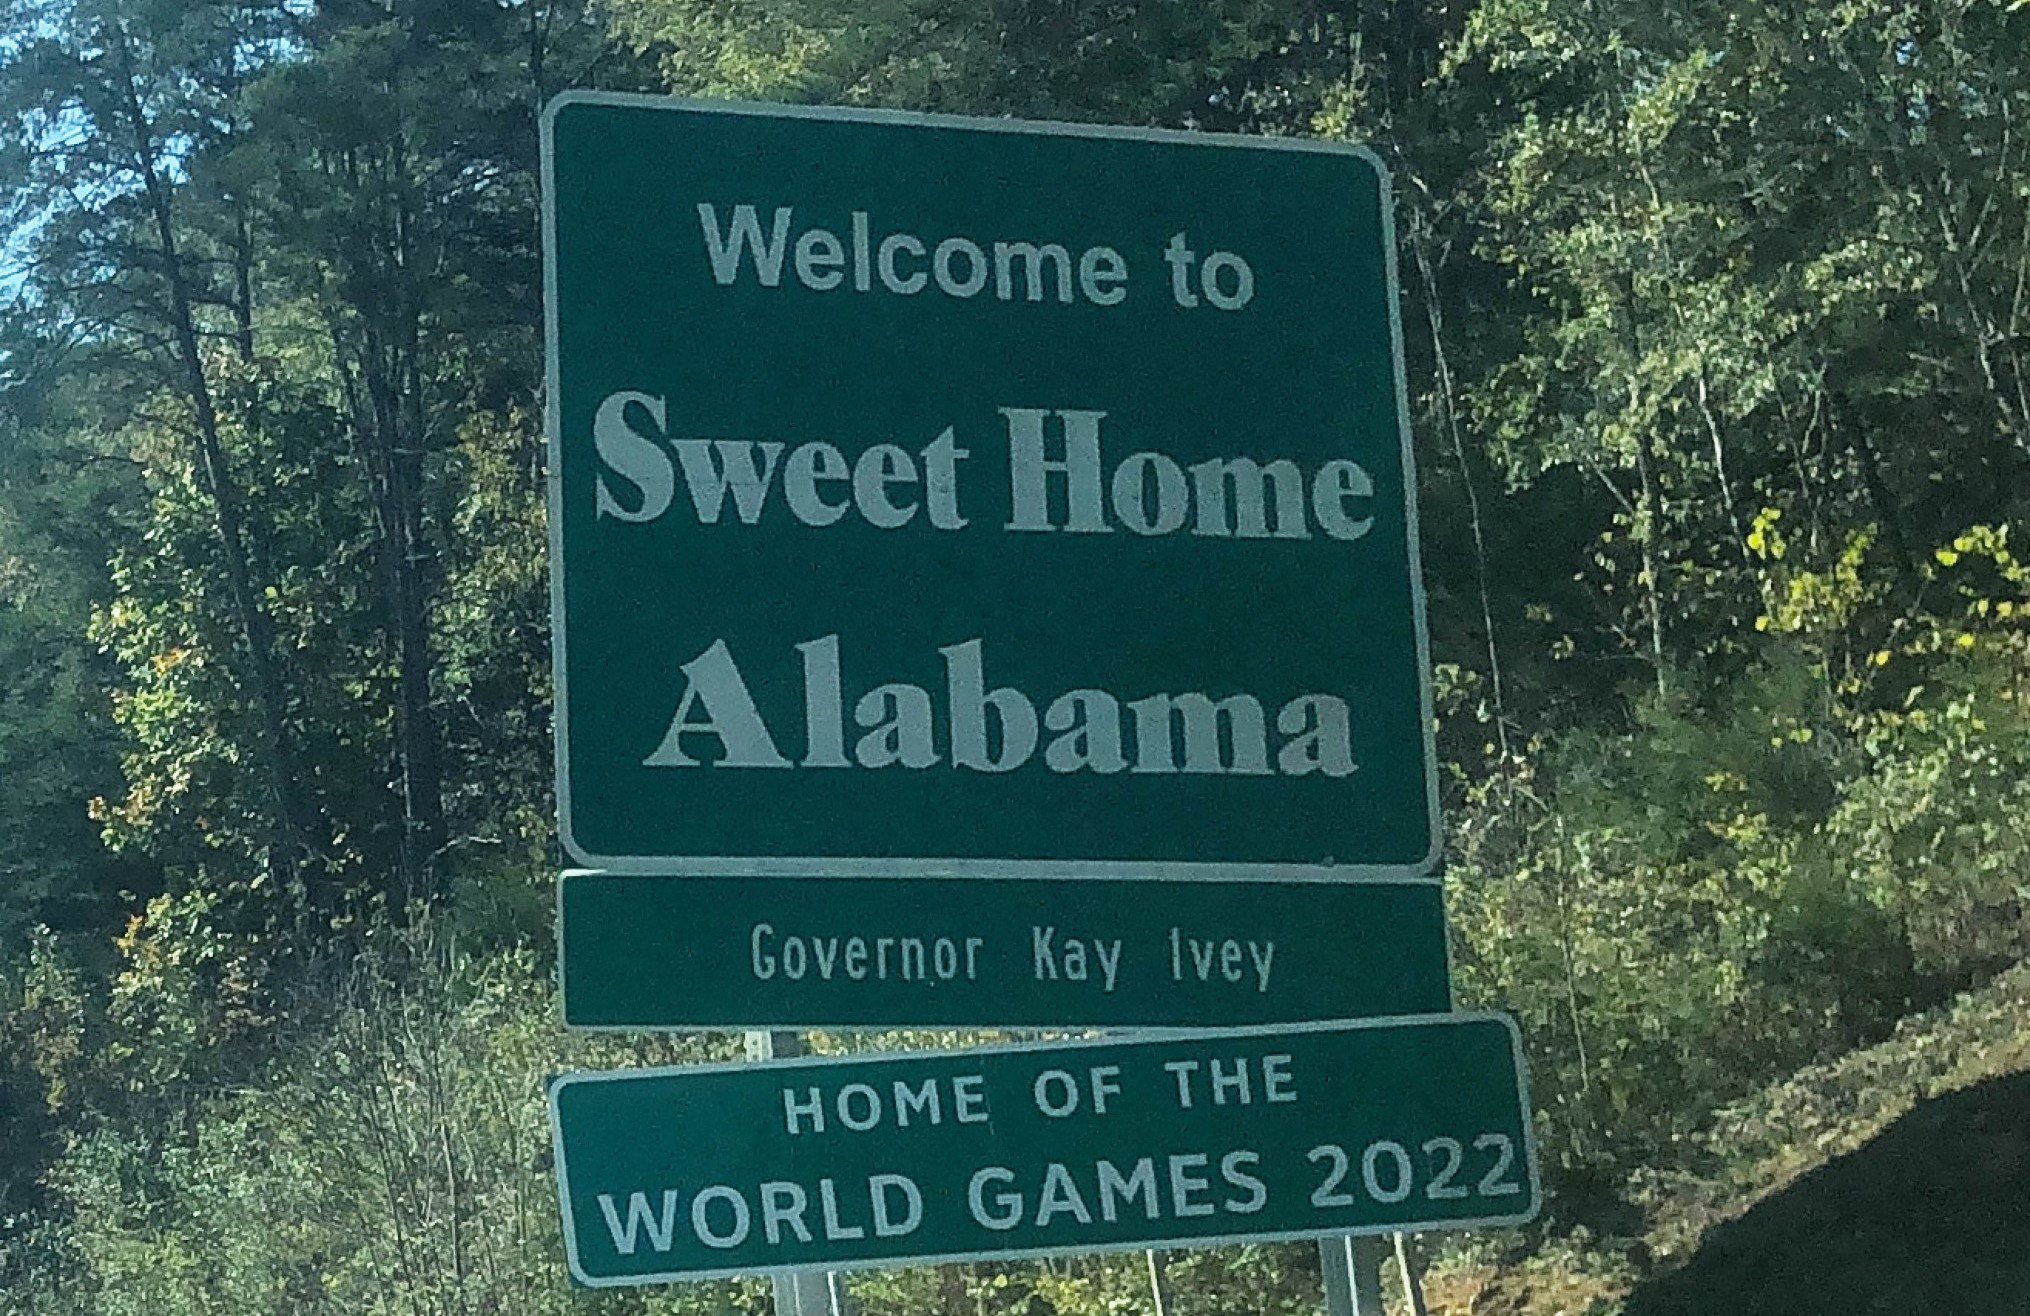 Birmingham 2022 World Games medals to go on tour of Alabama